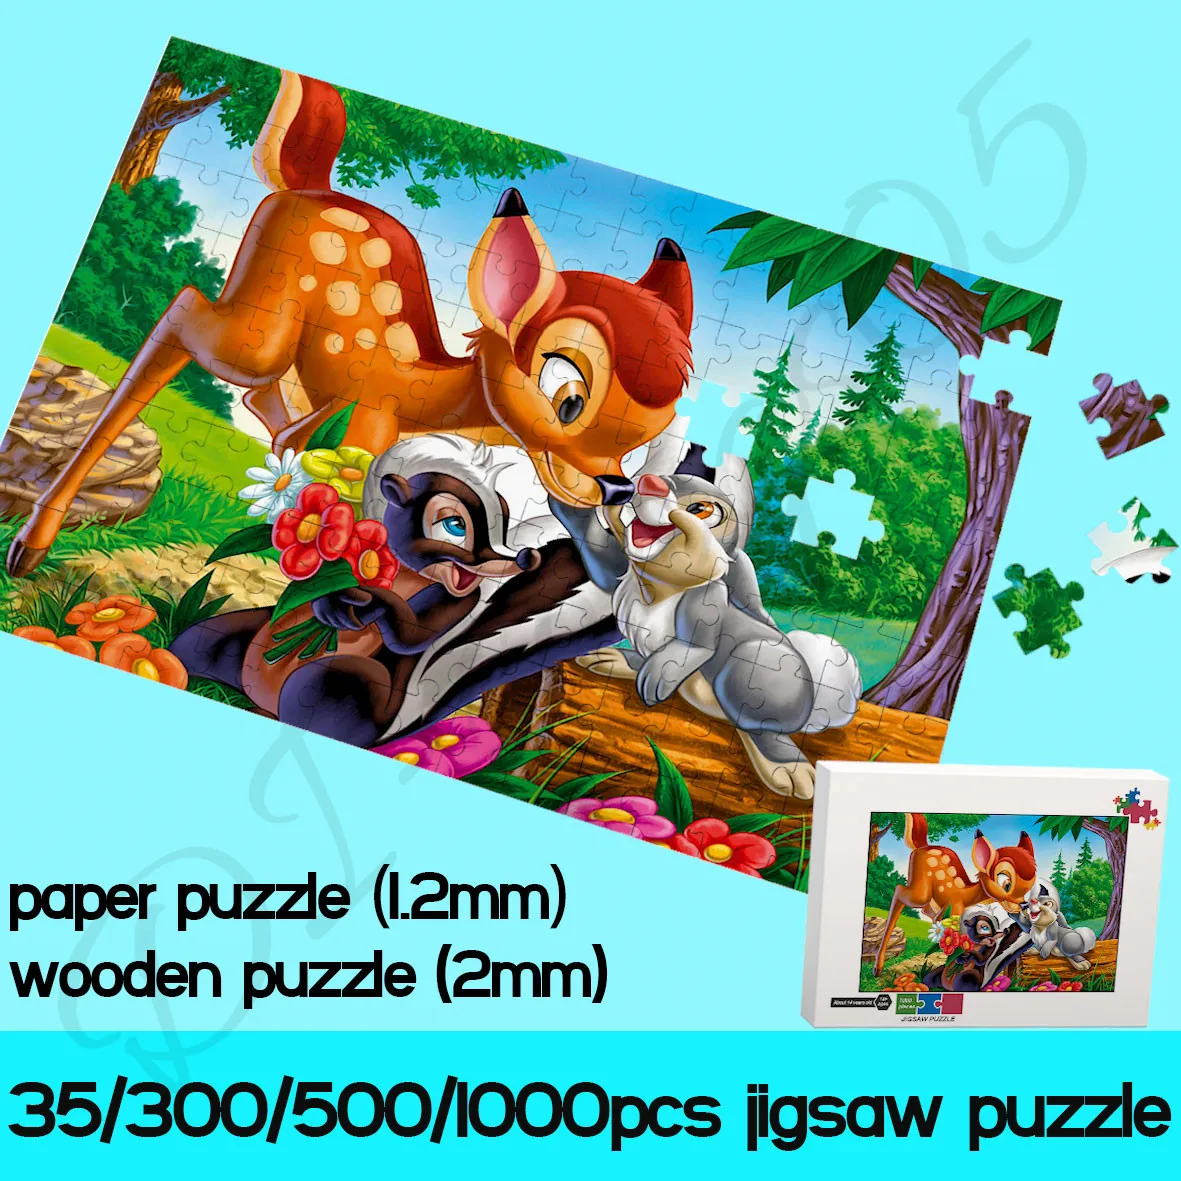 

Bambi Jigsaw Puzzles Disney Animation 35/300/500/1000 Piece Paper and Wooden Puzzles Cartoon Decompress Handmade Toys for Kids